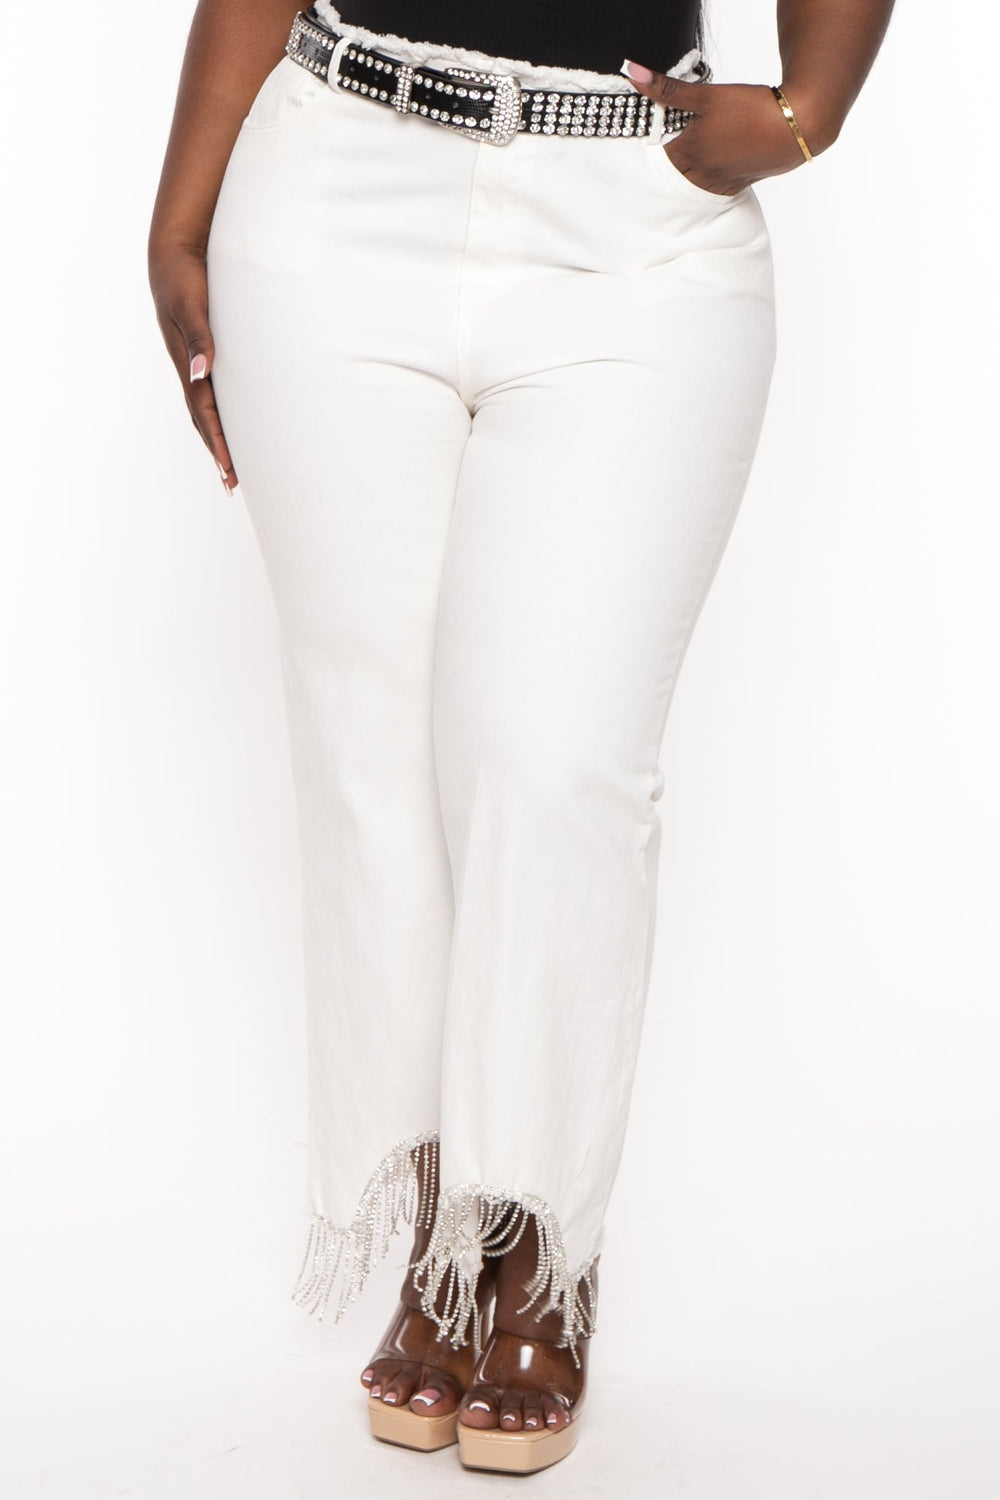 GEE GEE Jeans Plus Size High Waisted Rhinestone Denim Pants - White